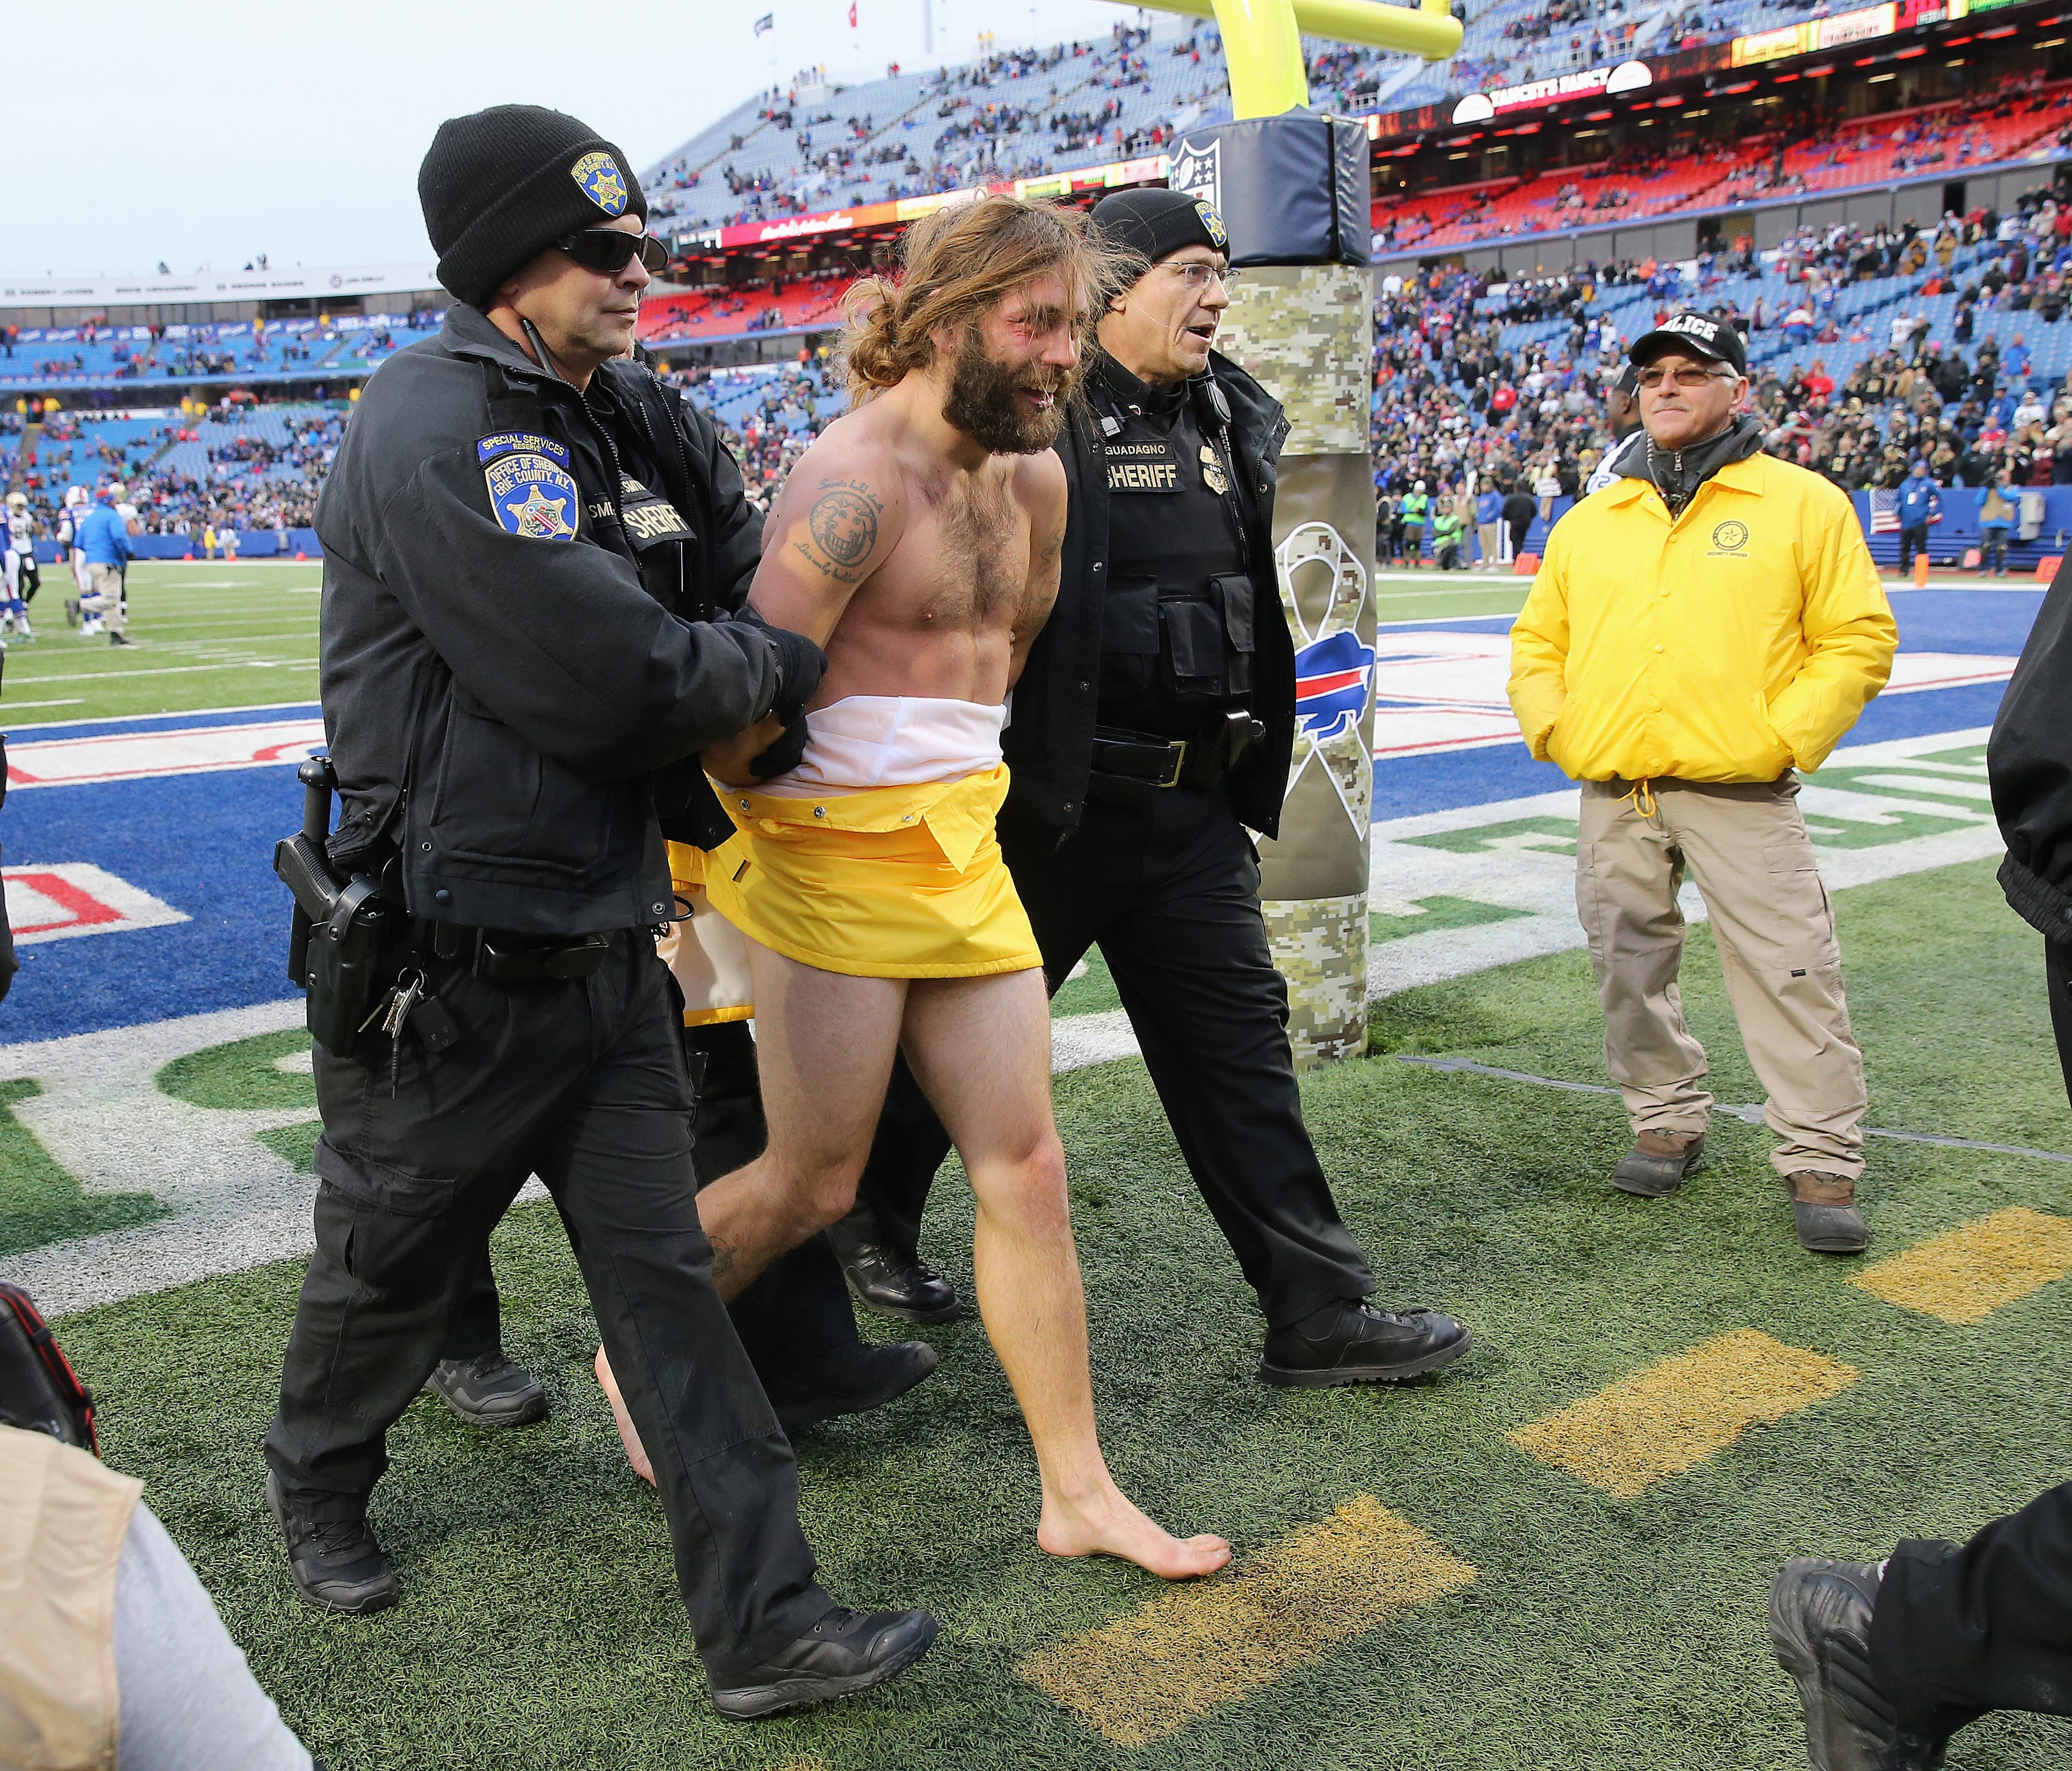 Police escort a streaker who ran onto the field during a 47-10 Bills loss to the Saints.